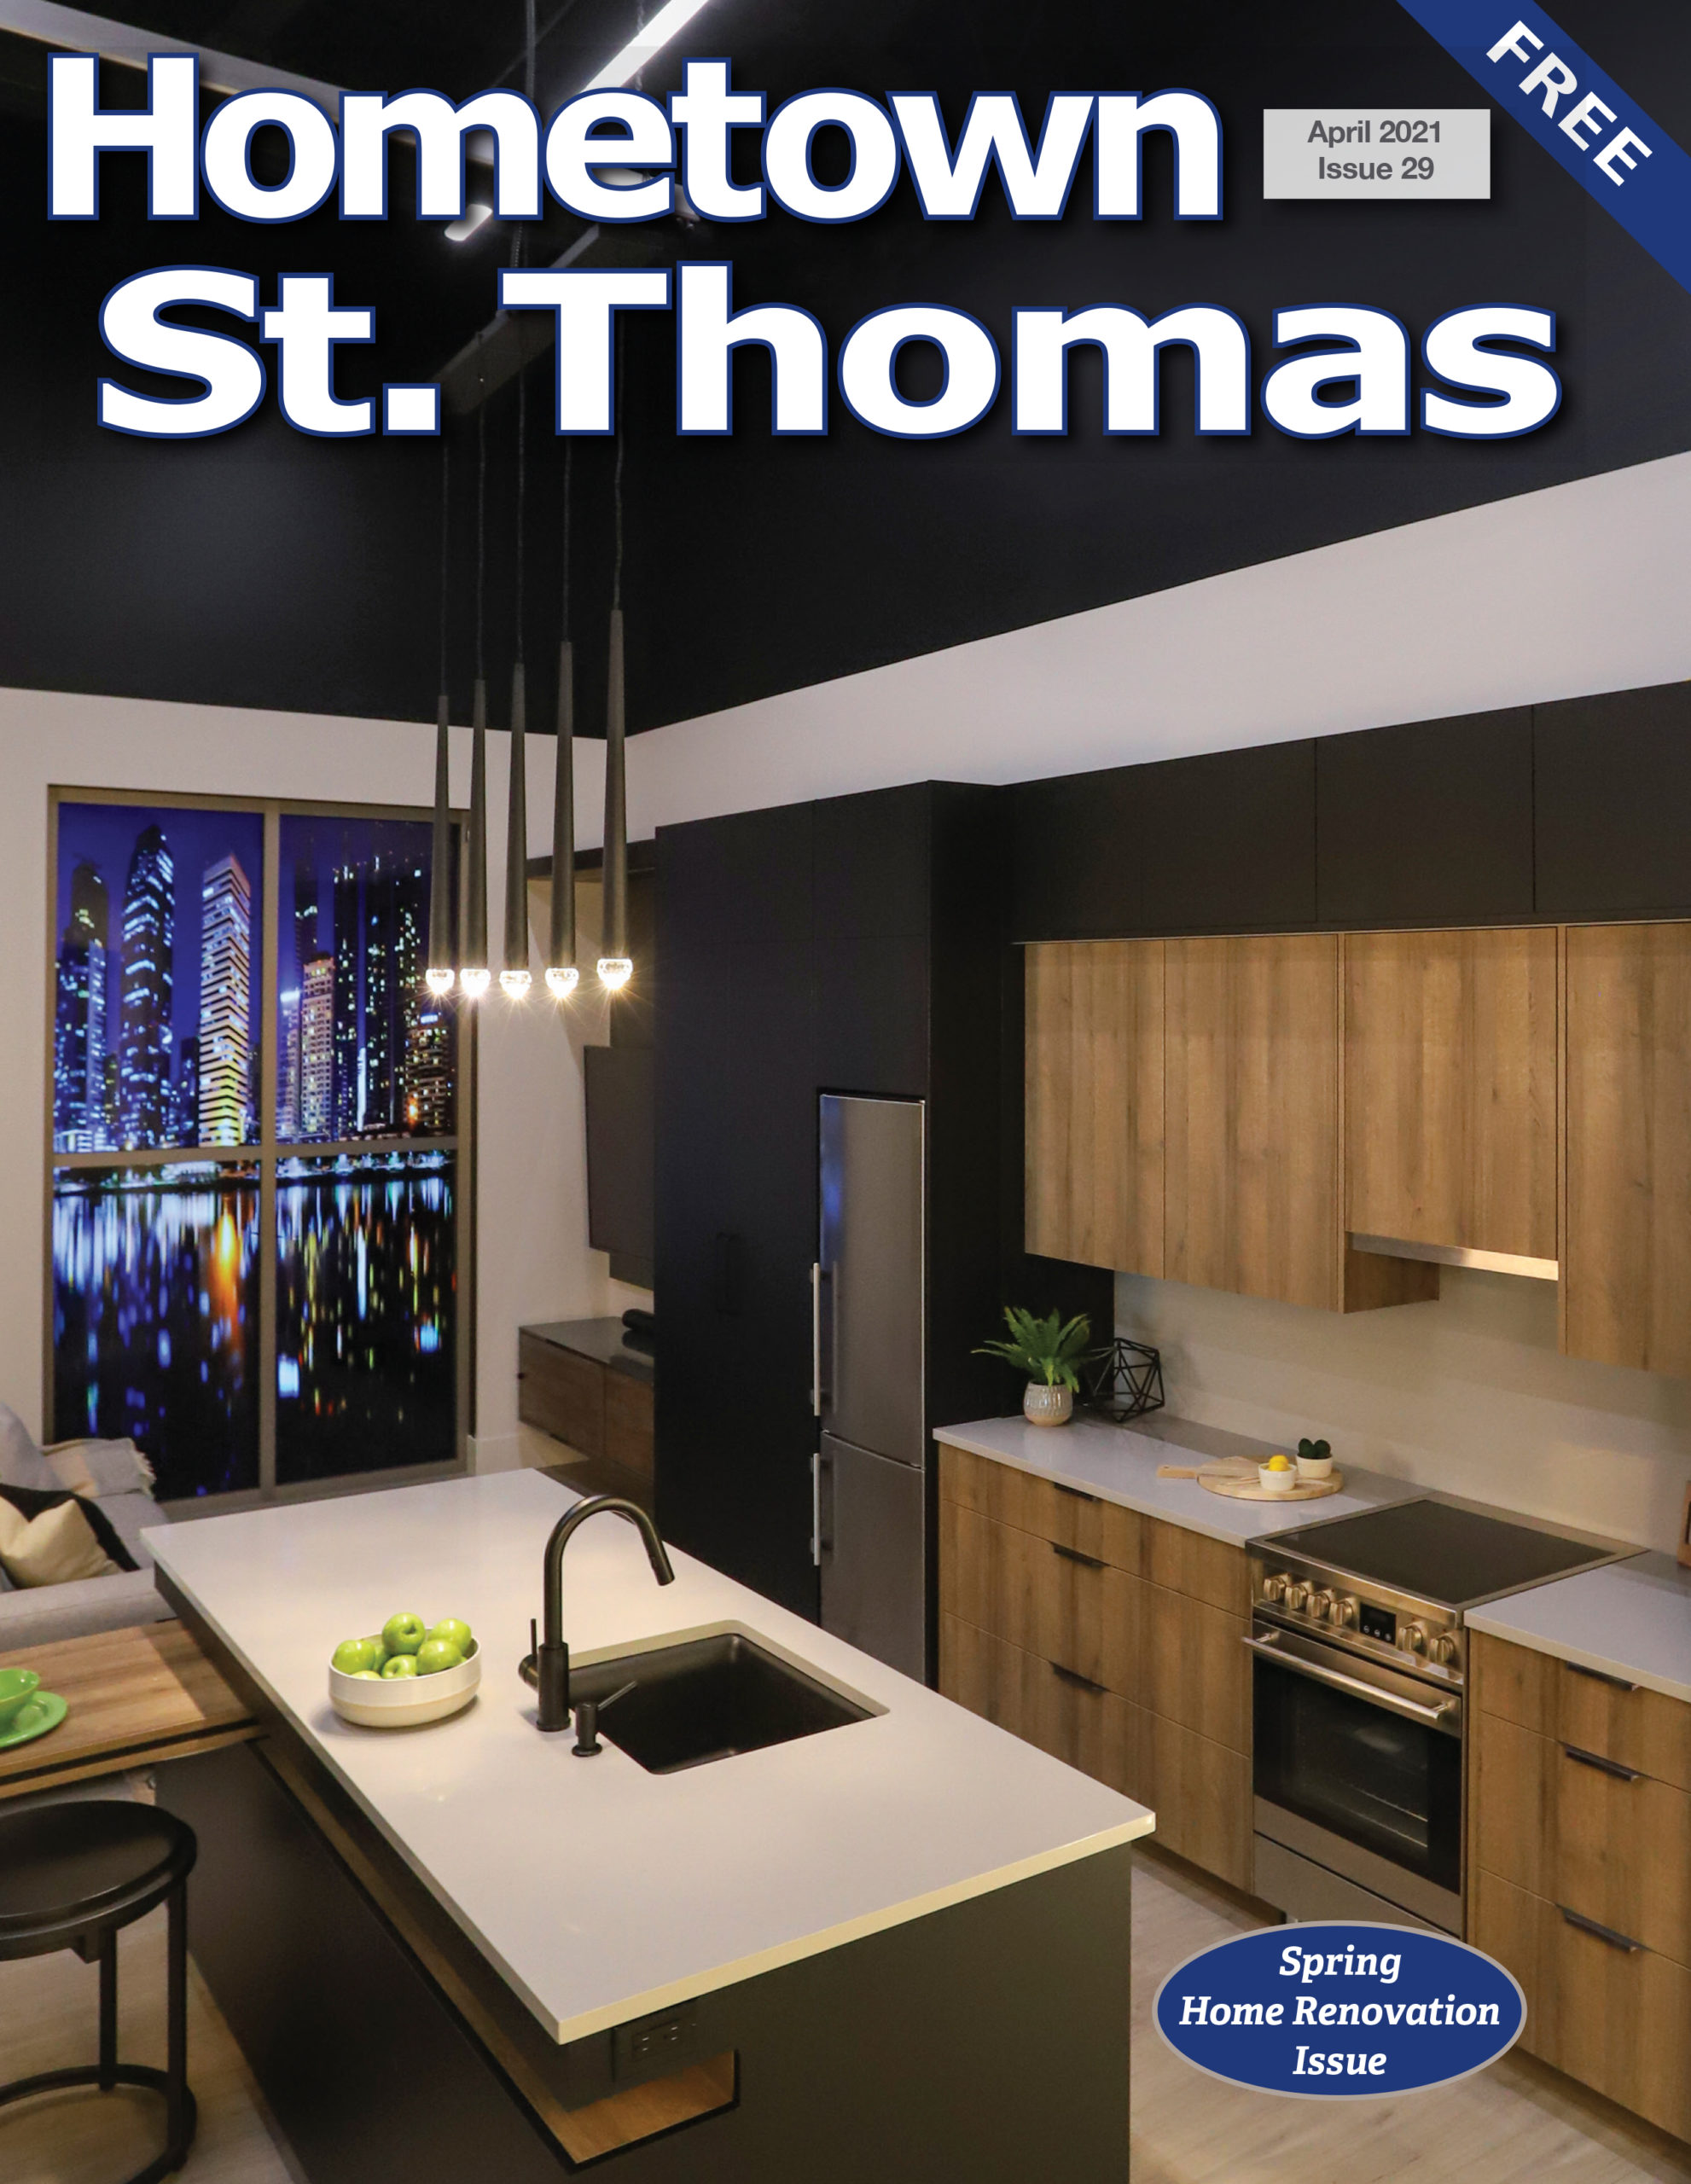 Hometown St. Thomas April Issue